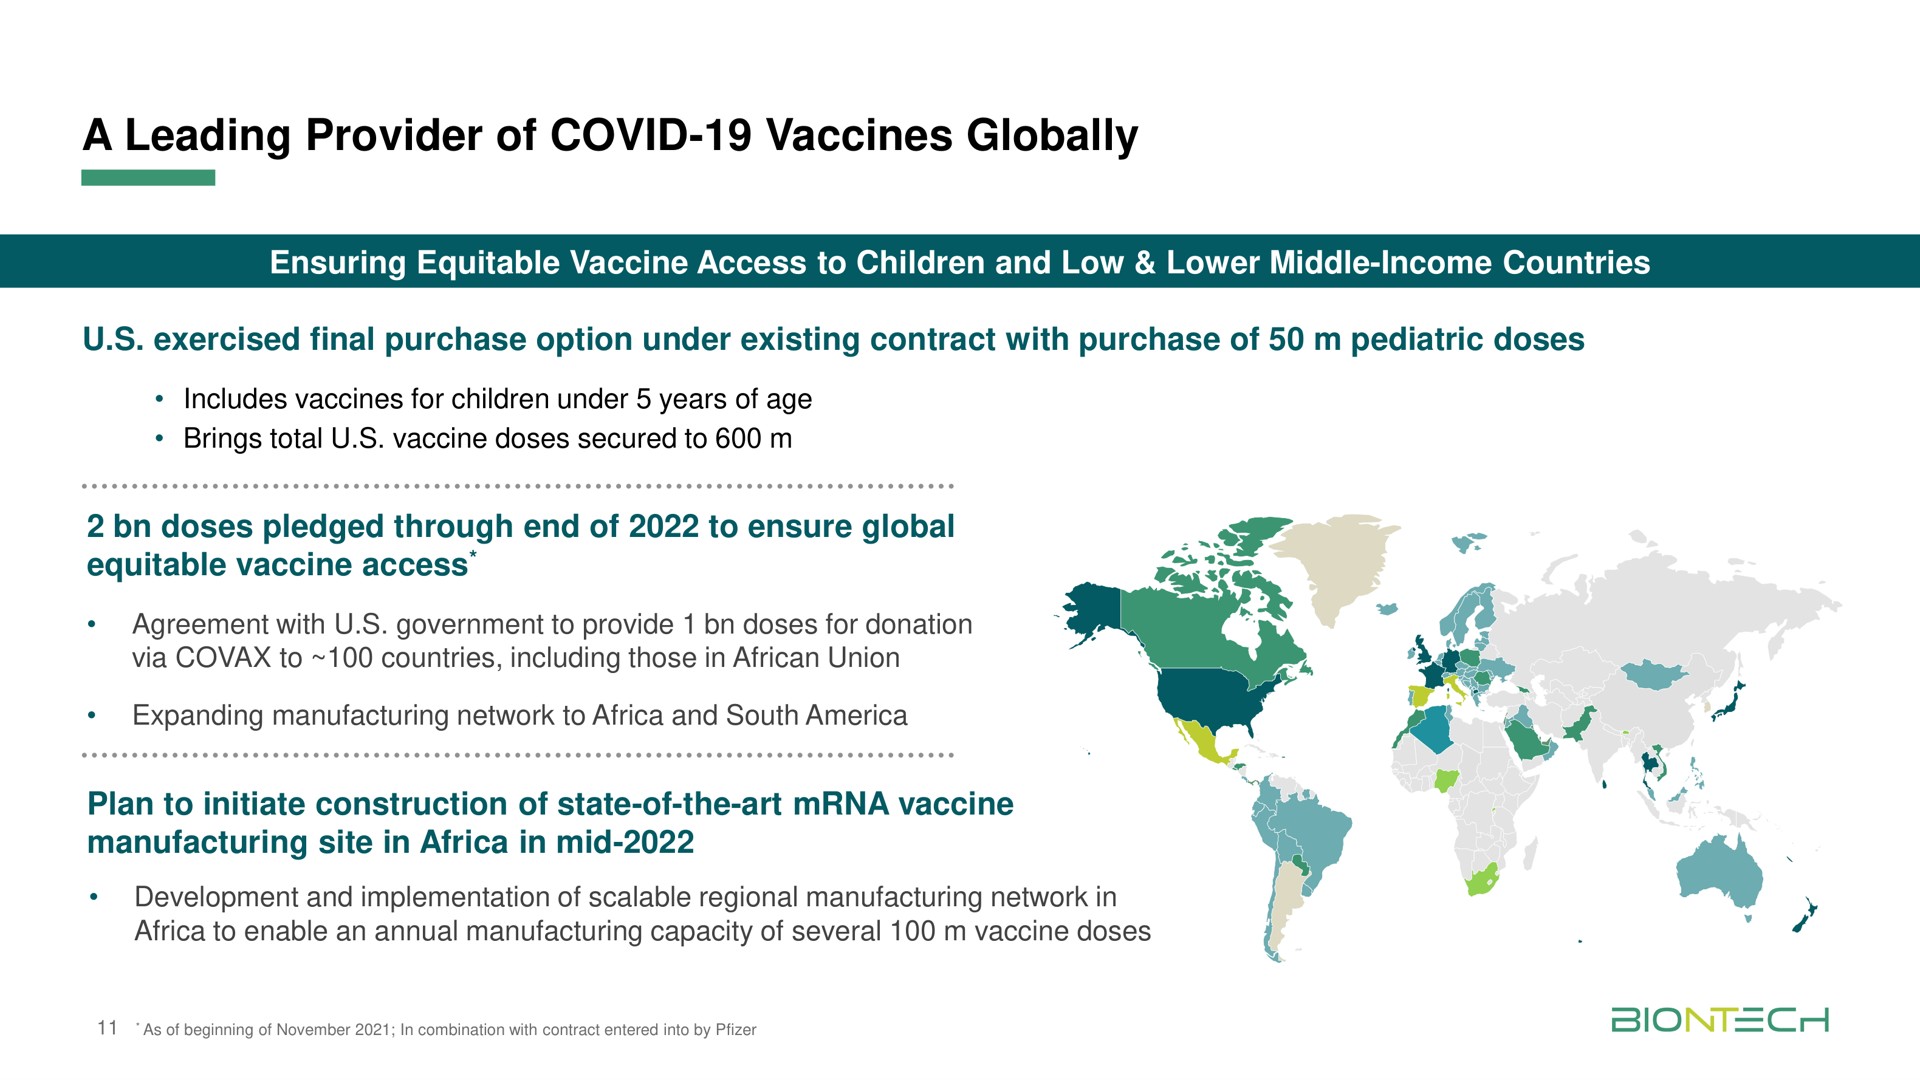 a leading provider of covid vaccines globally | BioNTech